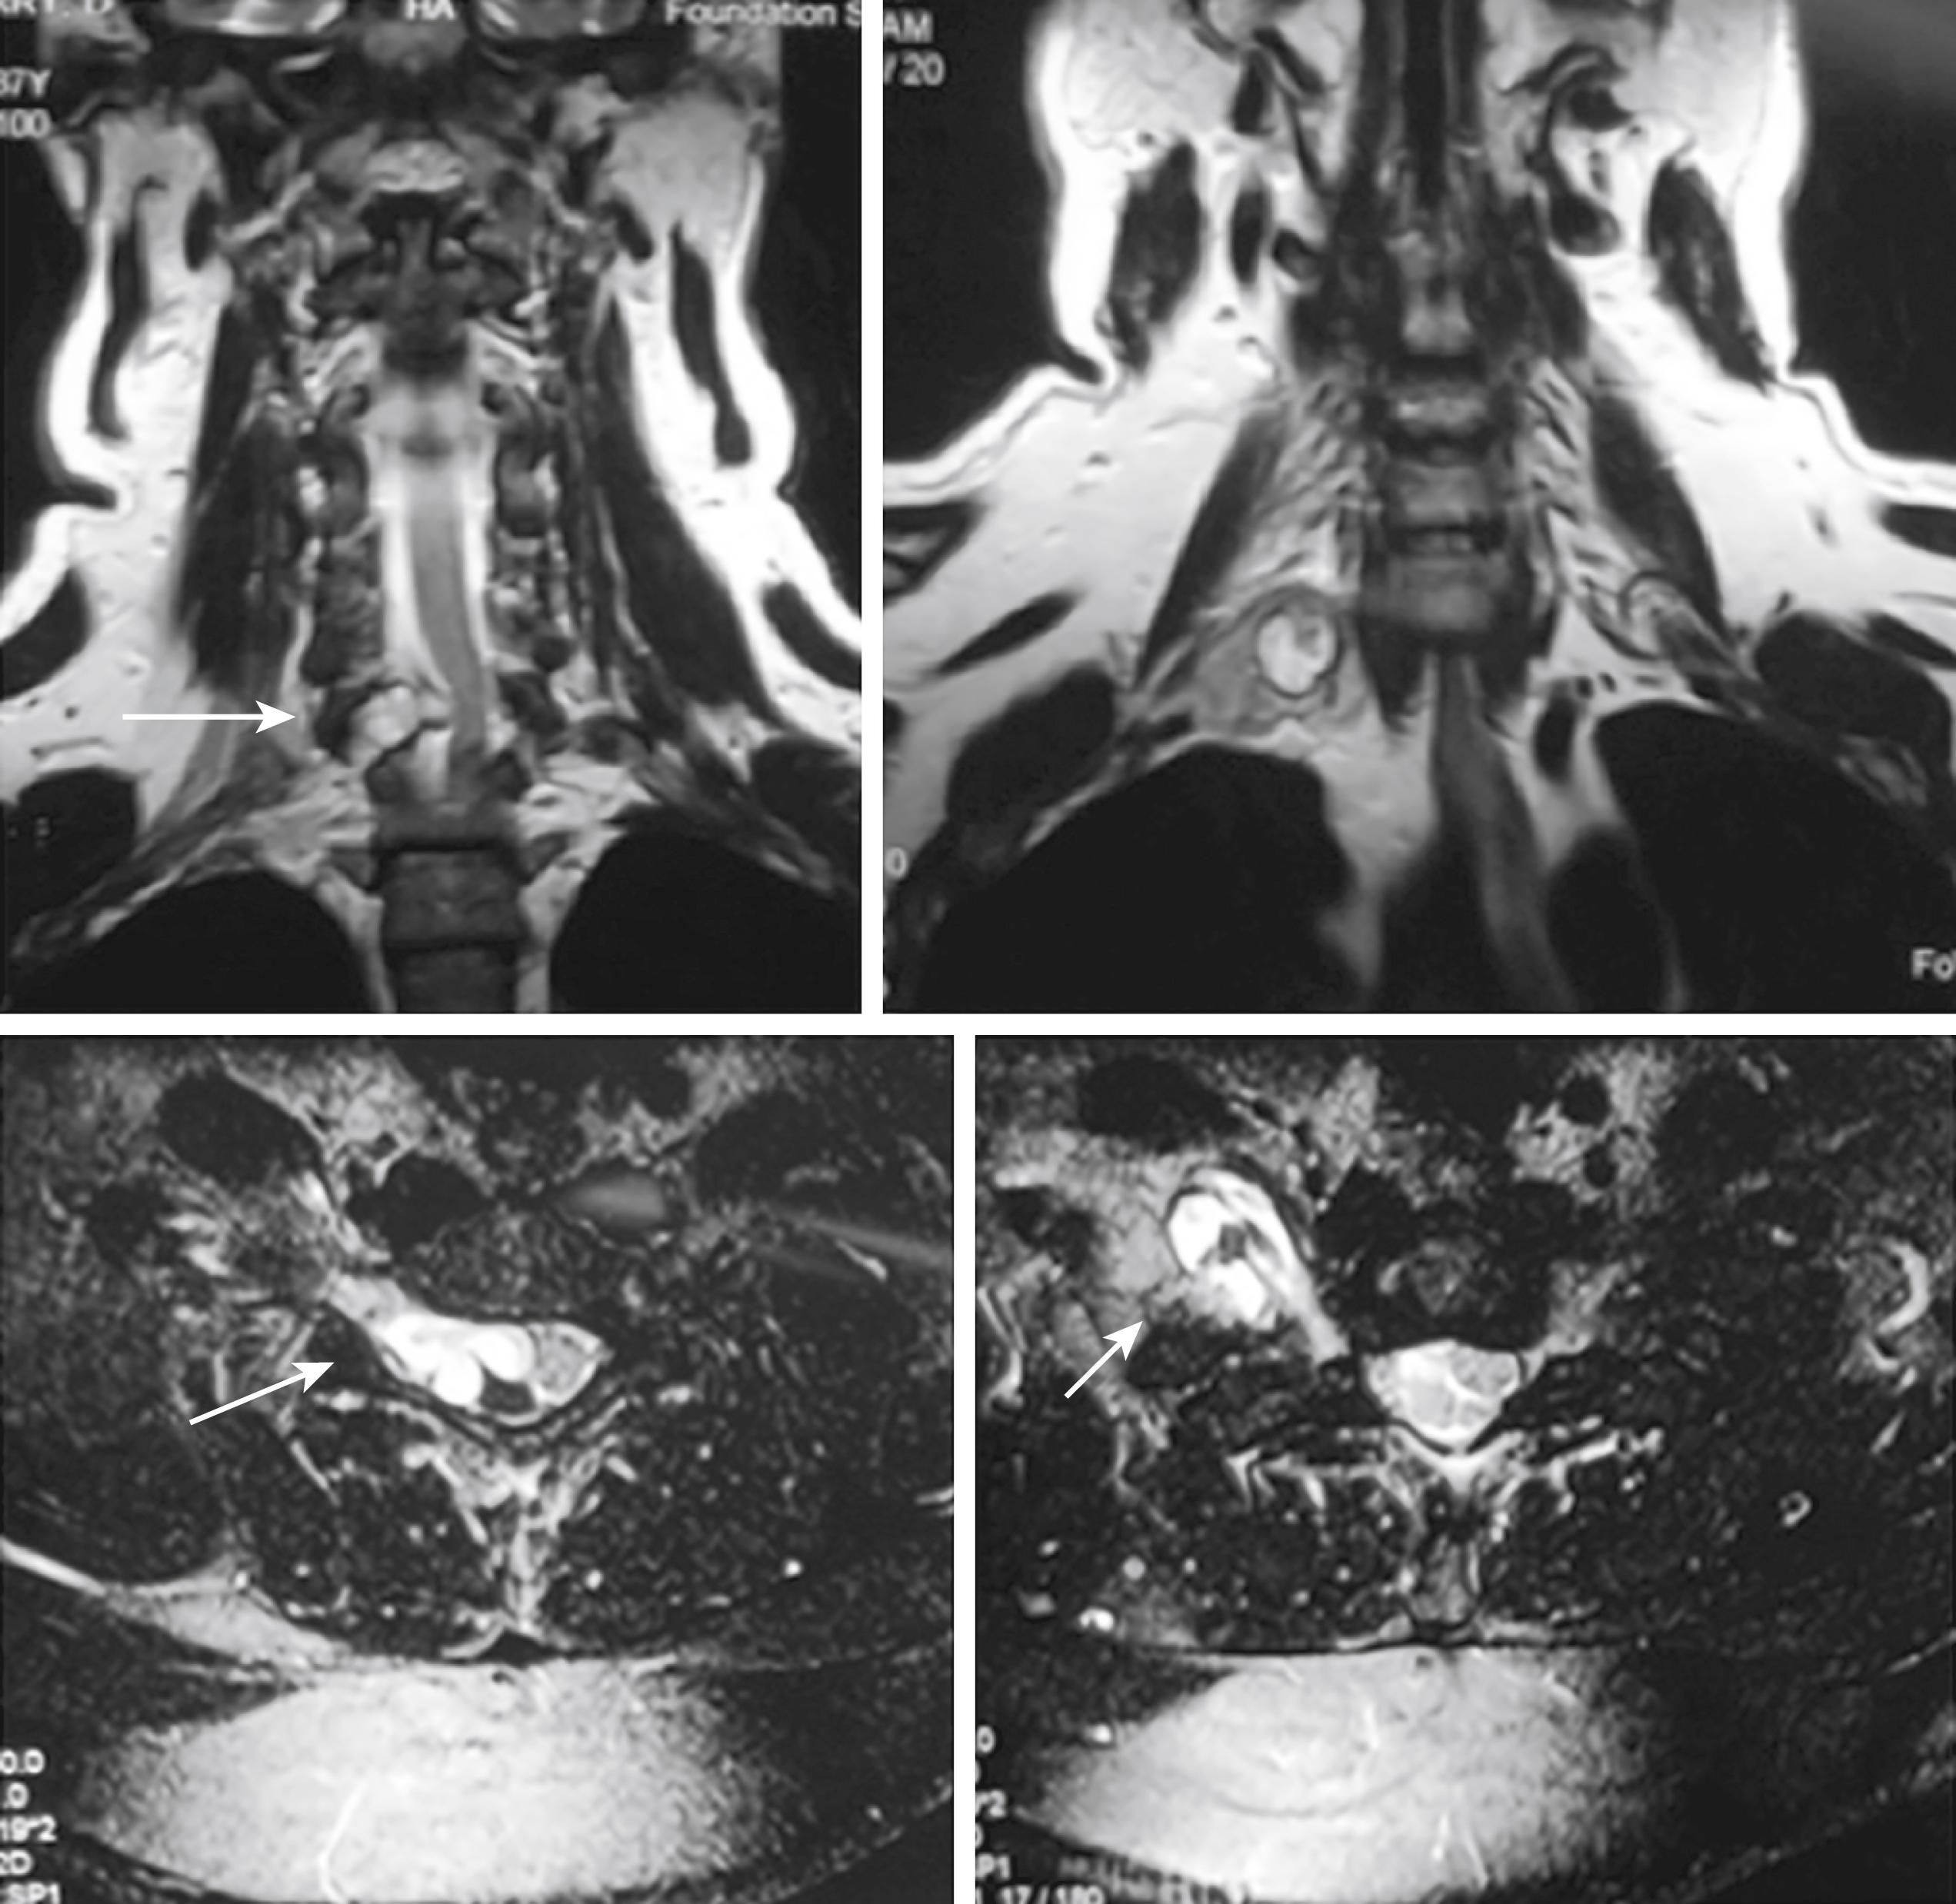 Fig. 50.2, Preoperative axial and coronal T2-weighted magnetic resonance image of a 39-year-old male demonstrating a hyperintense mass along the course of the C7 spinal nerve. Characteristic cystic changes with heterogeneity as seen in schwannomas are marked by the white arrows. There is displacement and compression of the spinal cord, and the tumor extends along the extraforaminal course of C7.